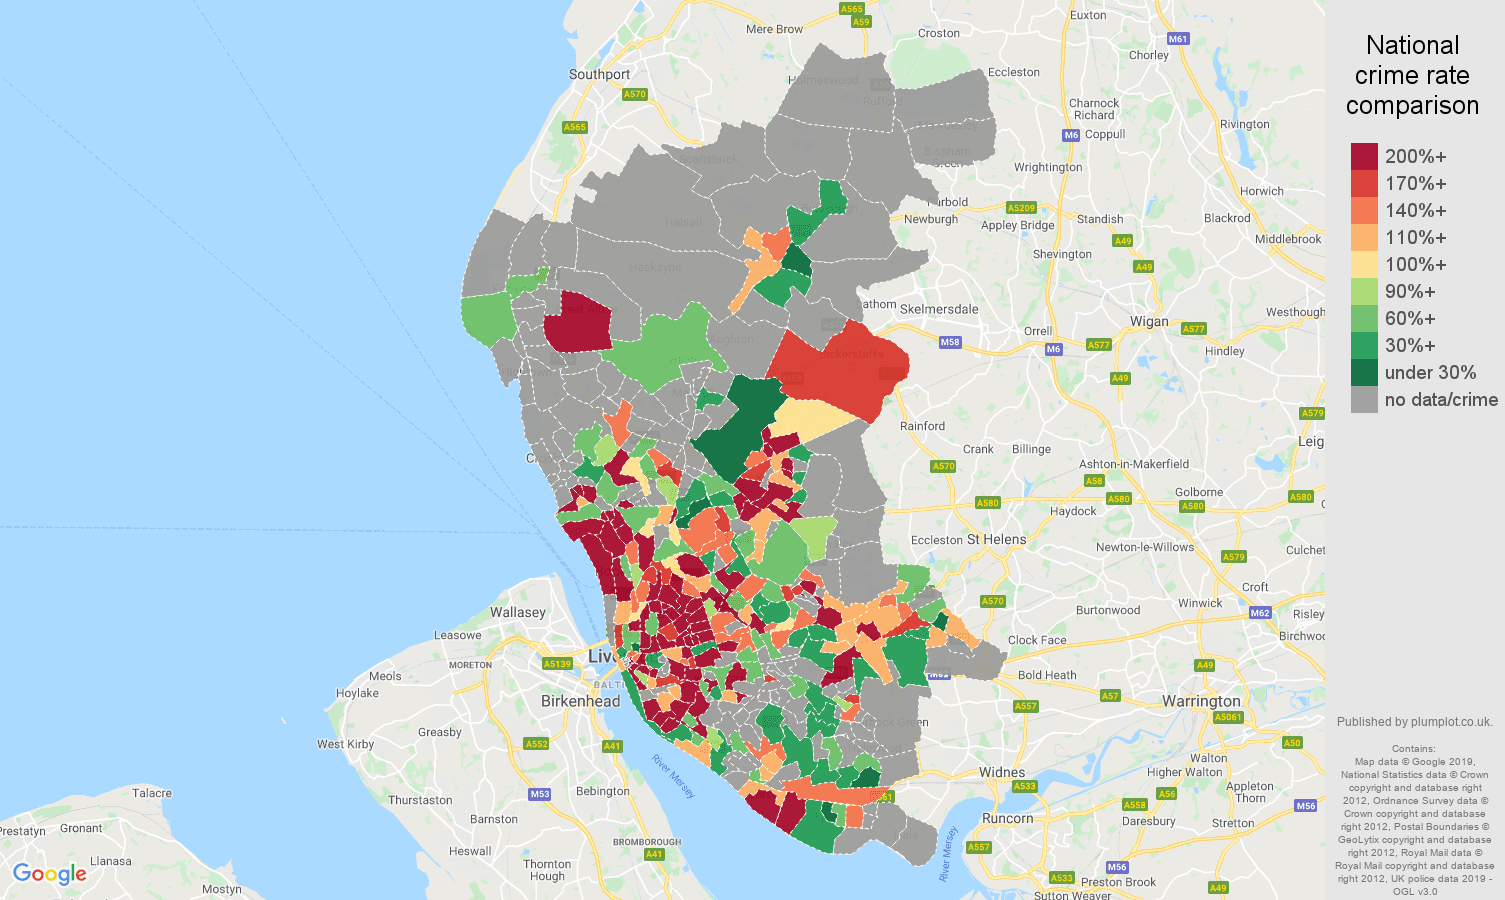 Liverpool possession of weapons crime rate comparison map